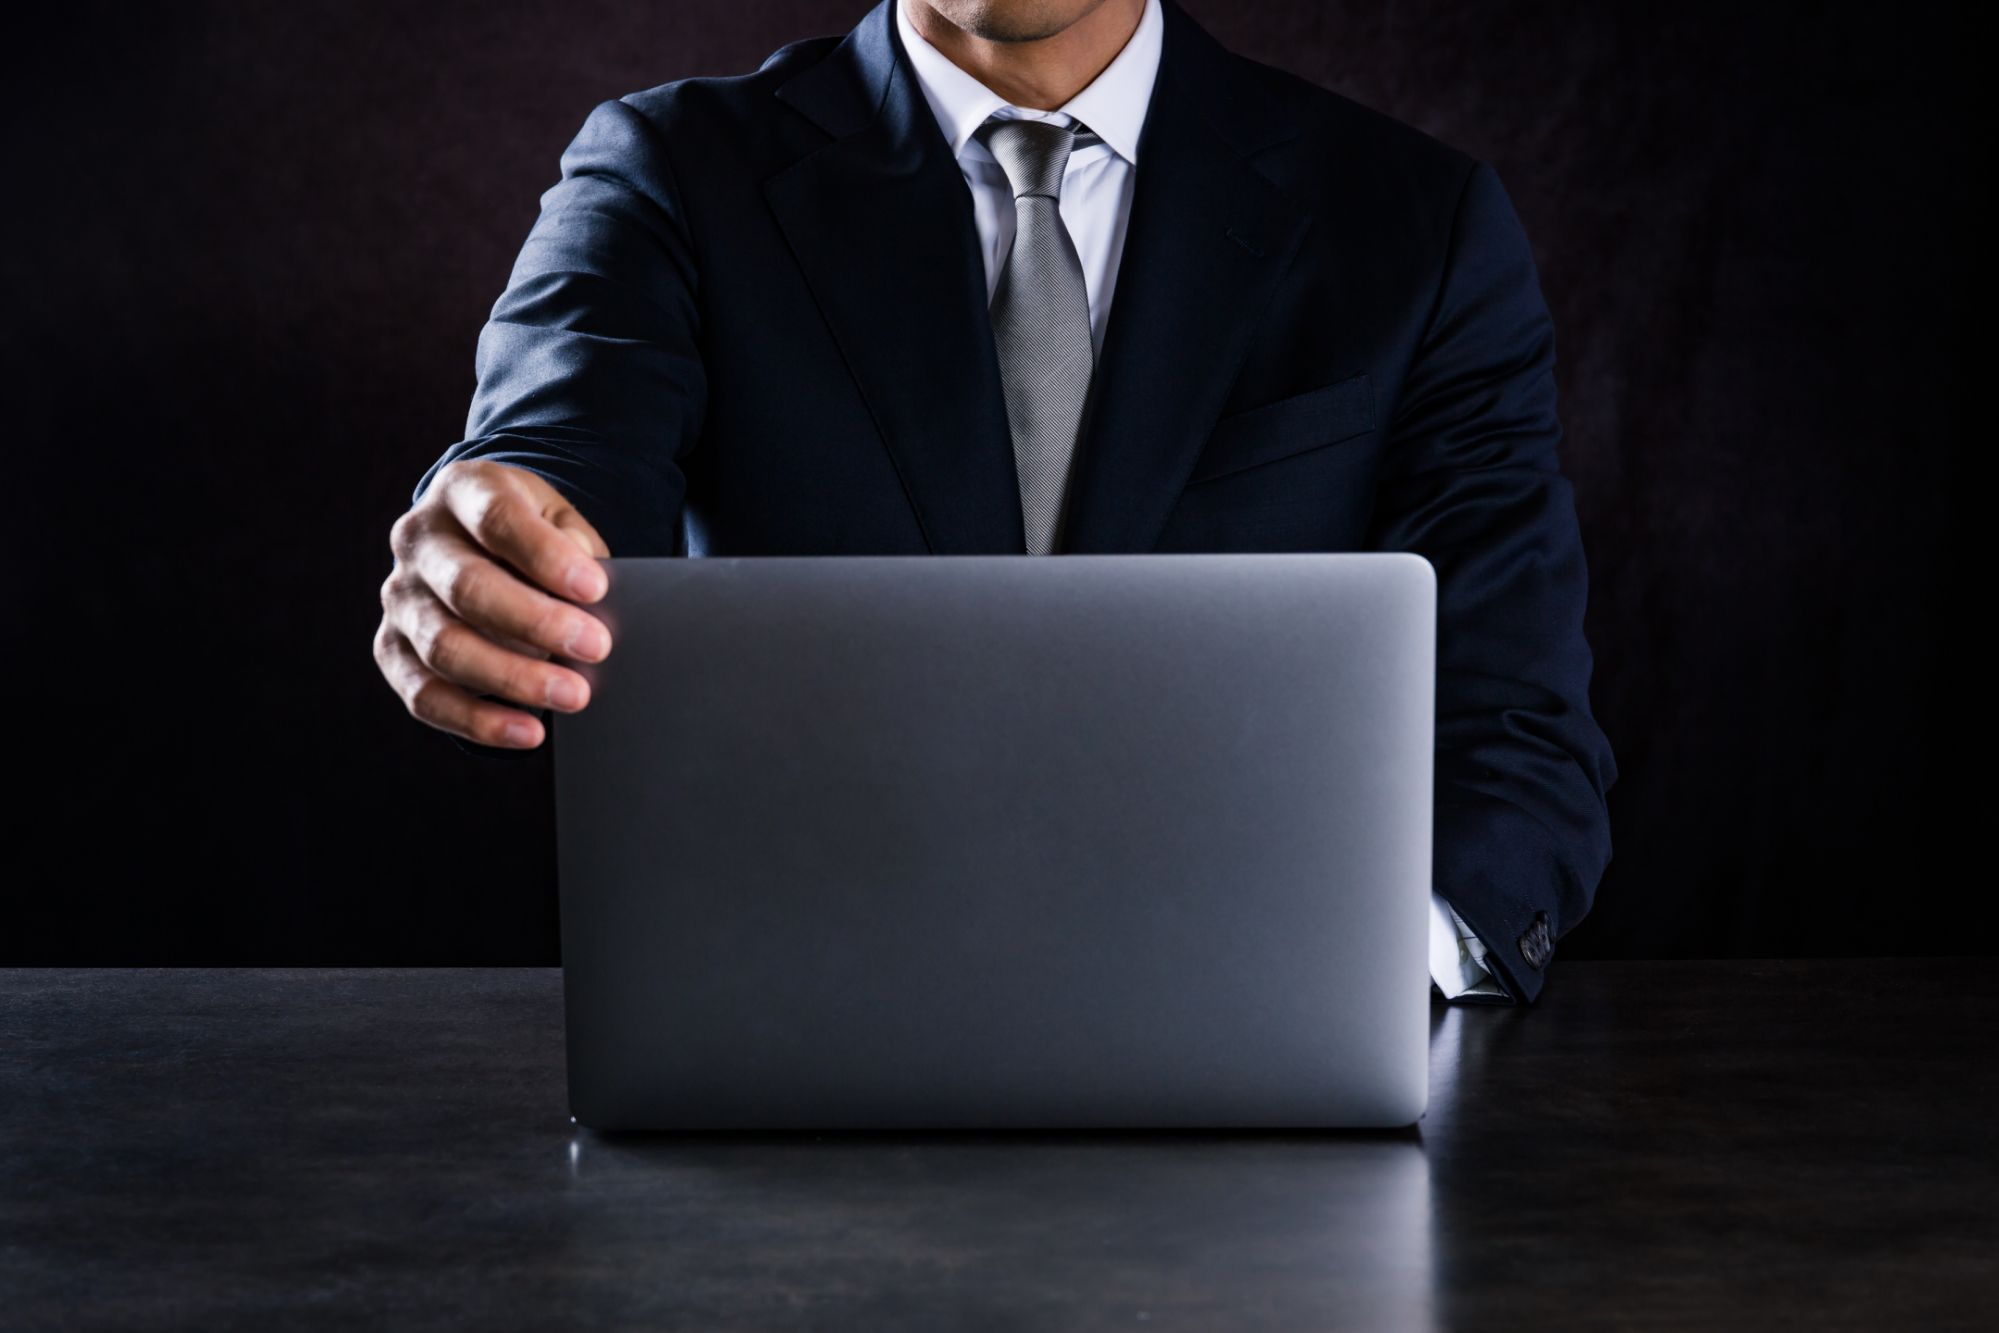 This is a photograph of businessman using laptop computer